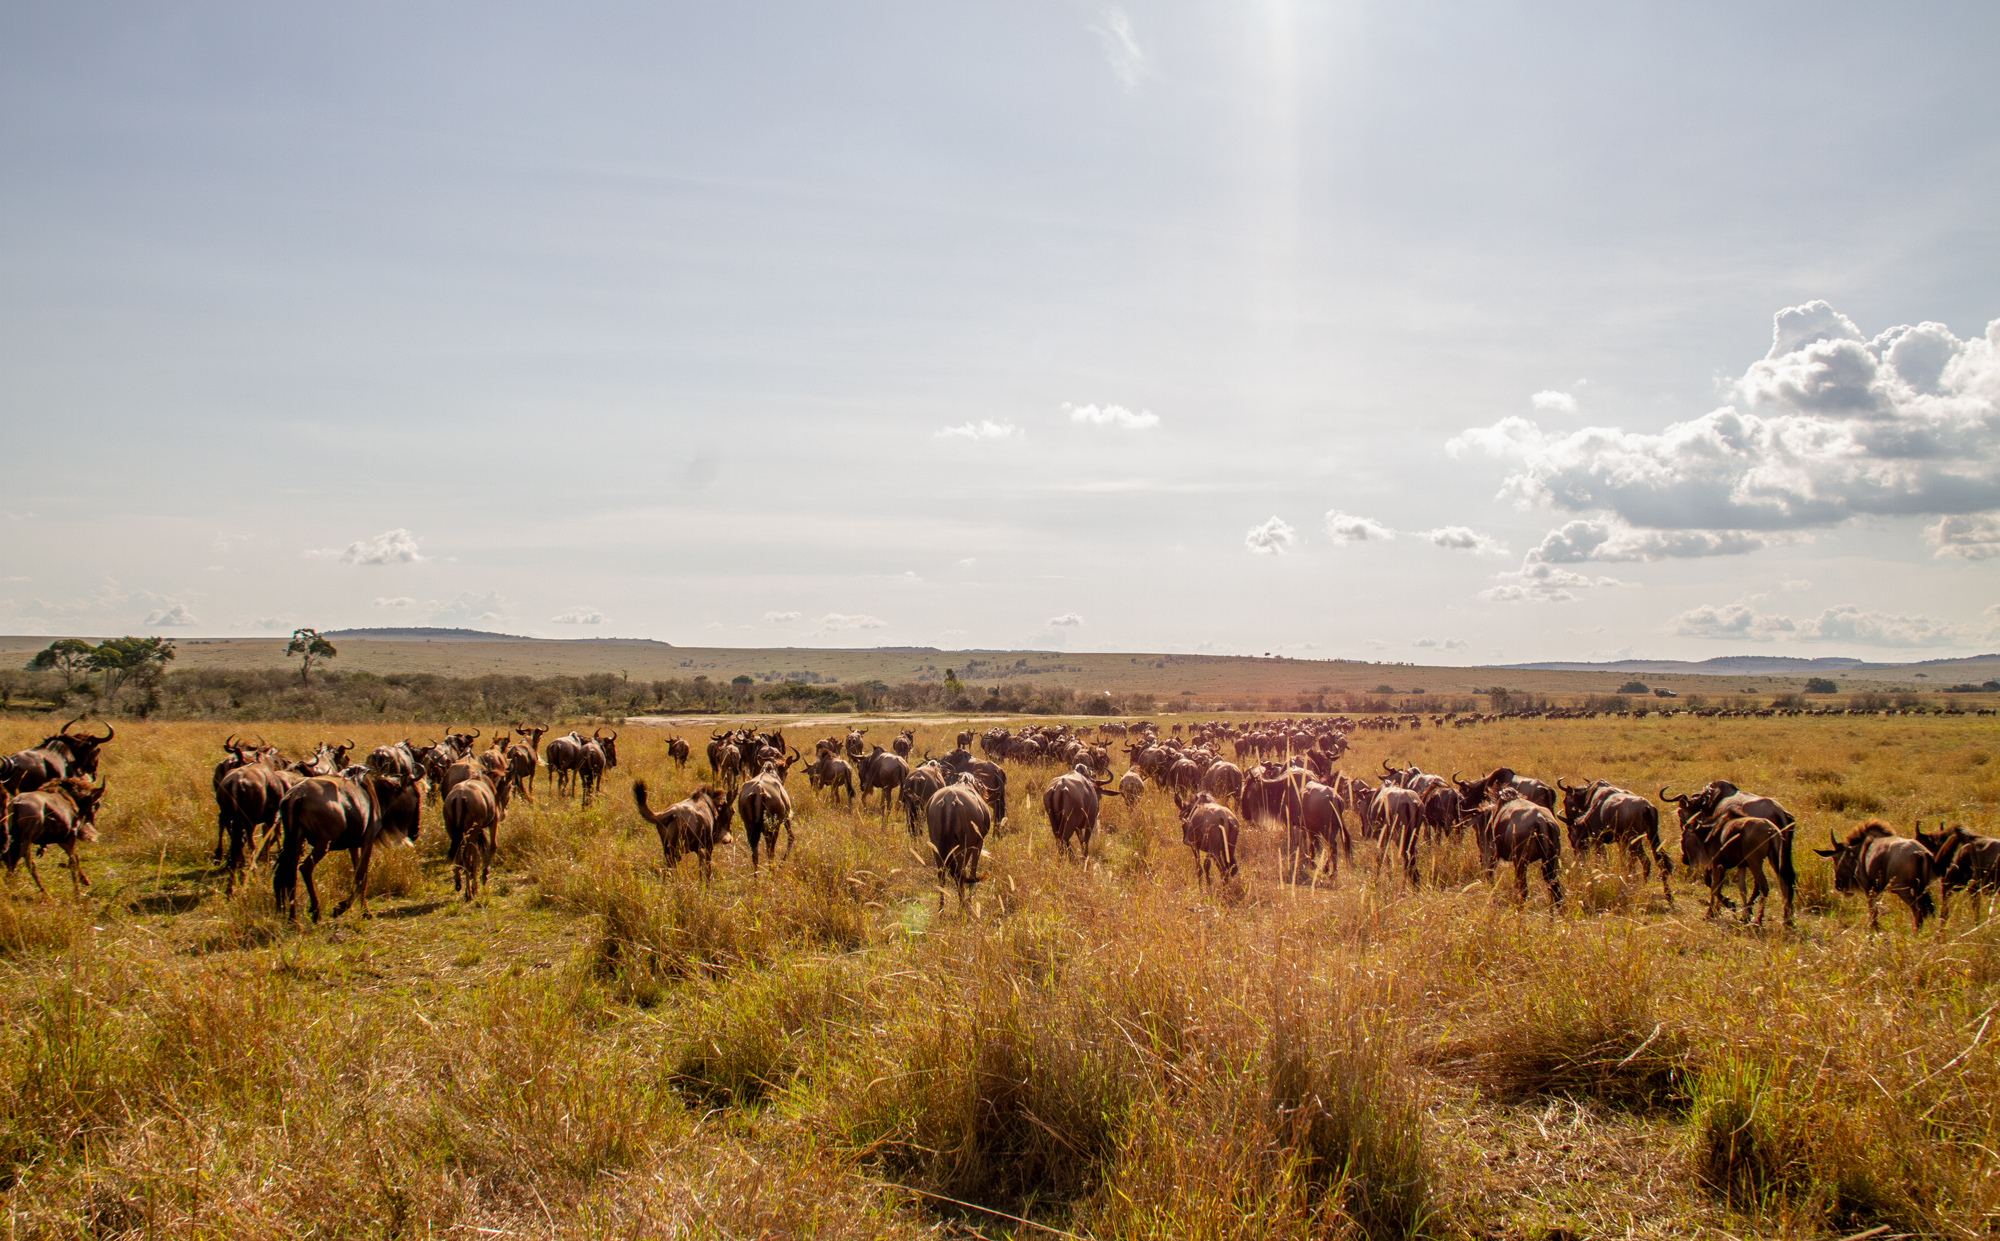 A Day of Photography in the Mara  